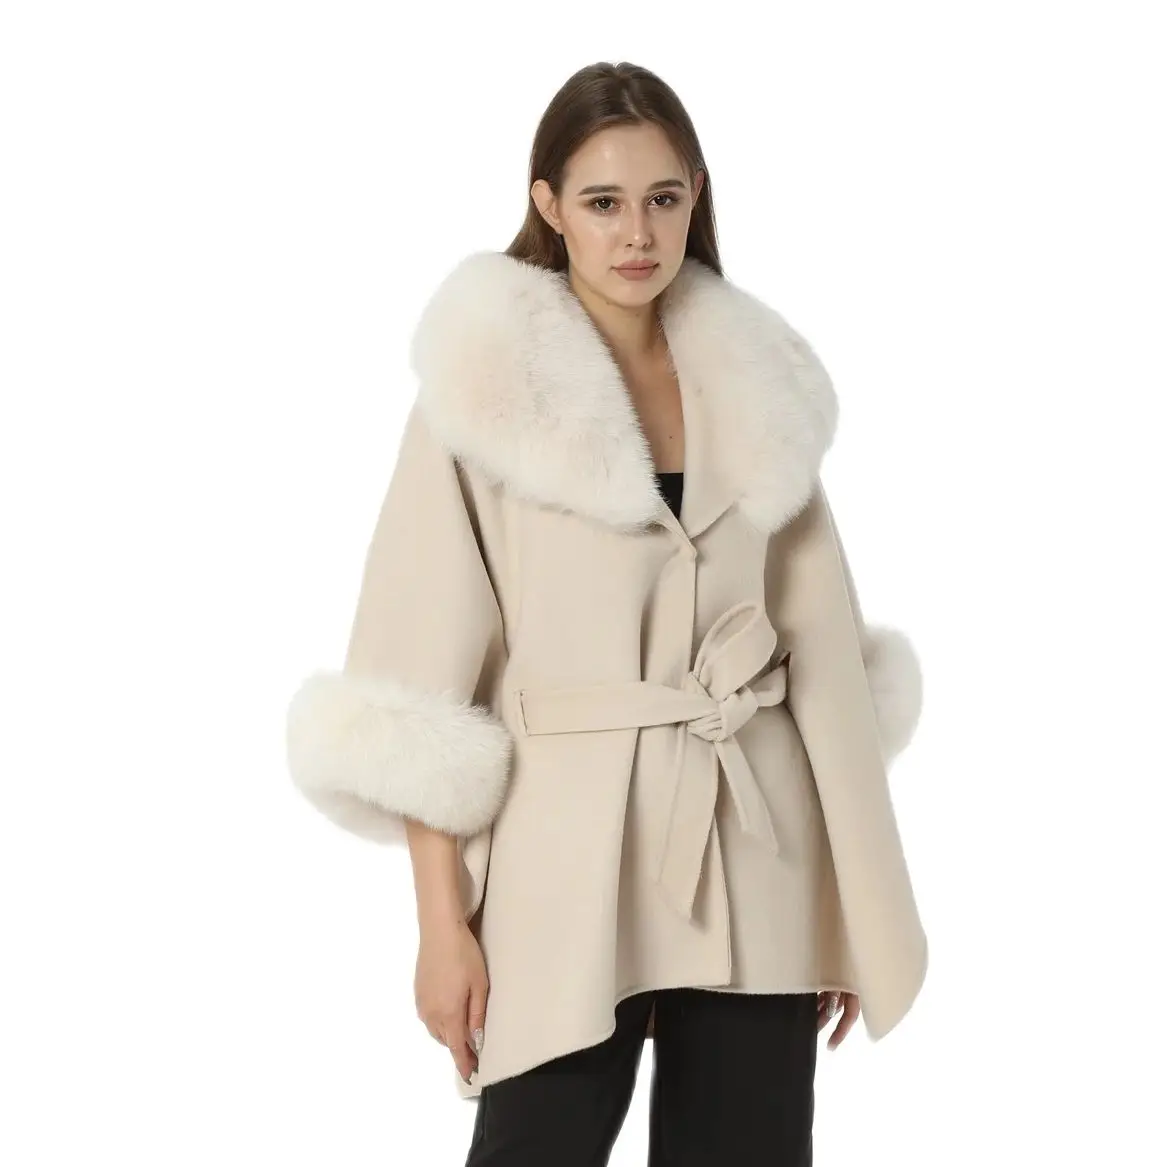 Shawl With Real Natural Fox Fur Collar And Hood Half Sleeve Cuffs With Belt 220614 Furry 2023 New 100%Wool Belt Women Outerwear